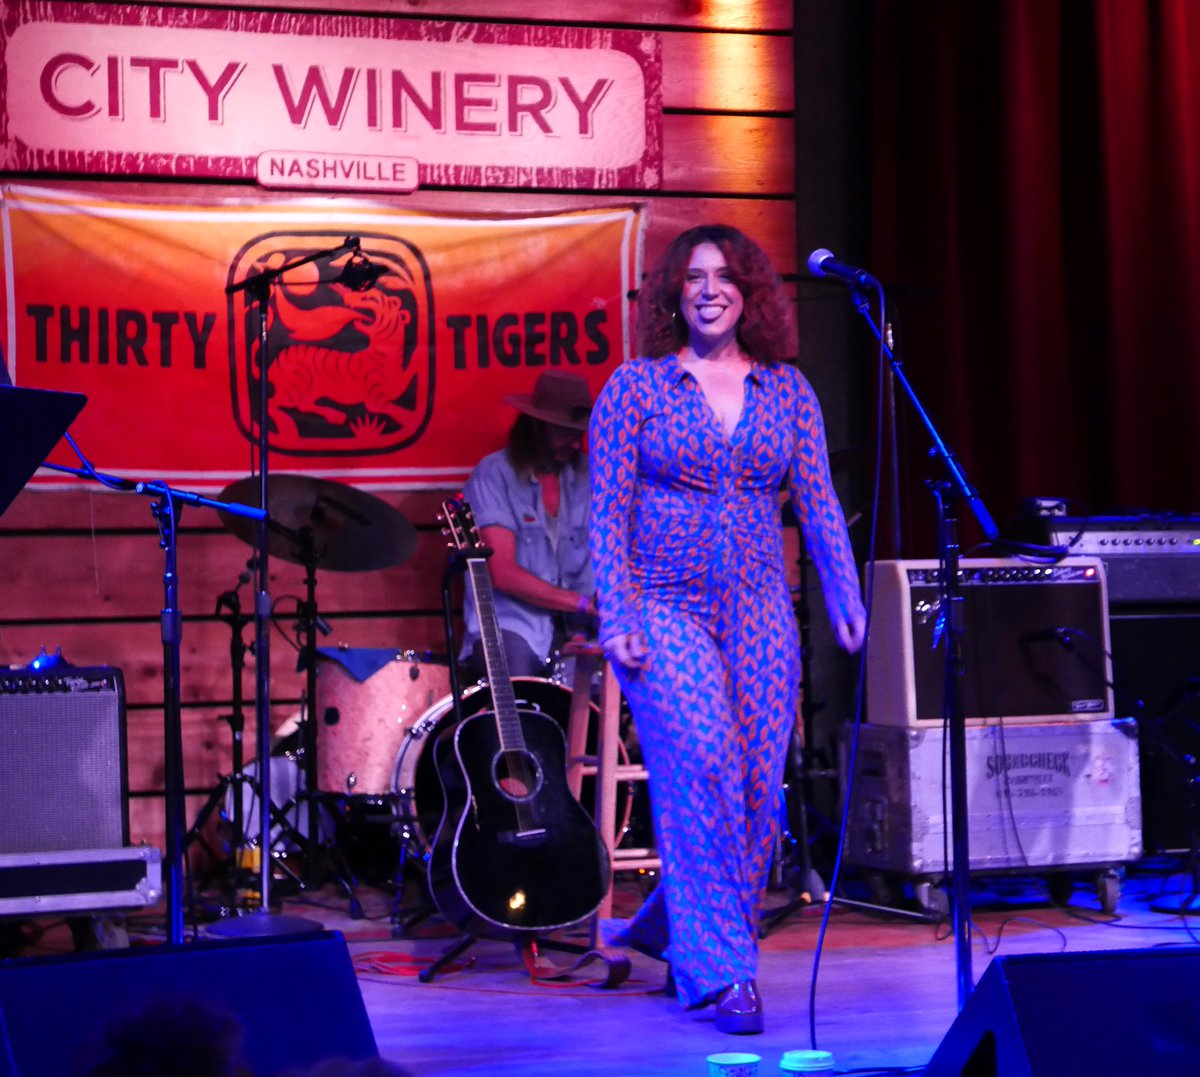 Lauren Housley and the Northern Cowboys, City Winery, Americanafest - Sep 23 #laurenhousley #laurenhousleyandthenortherncowboys #citywinerynashville #americanafest #grassrootsmusictour #listeningthroughthelens